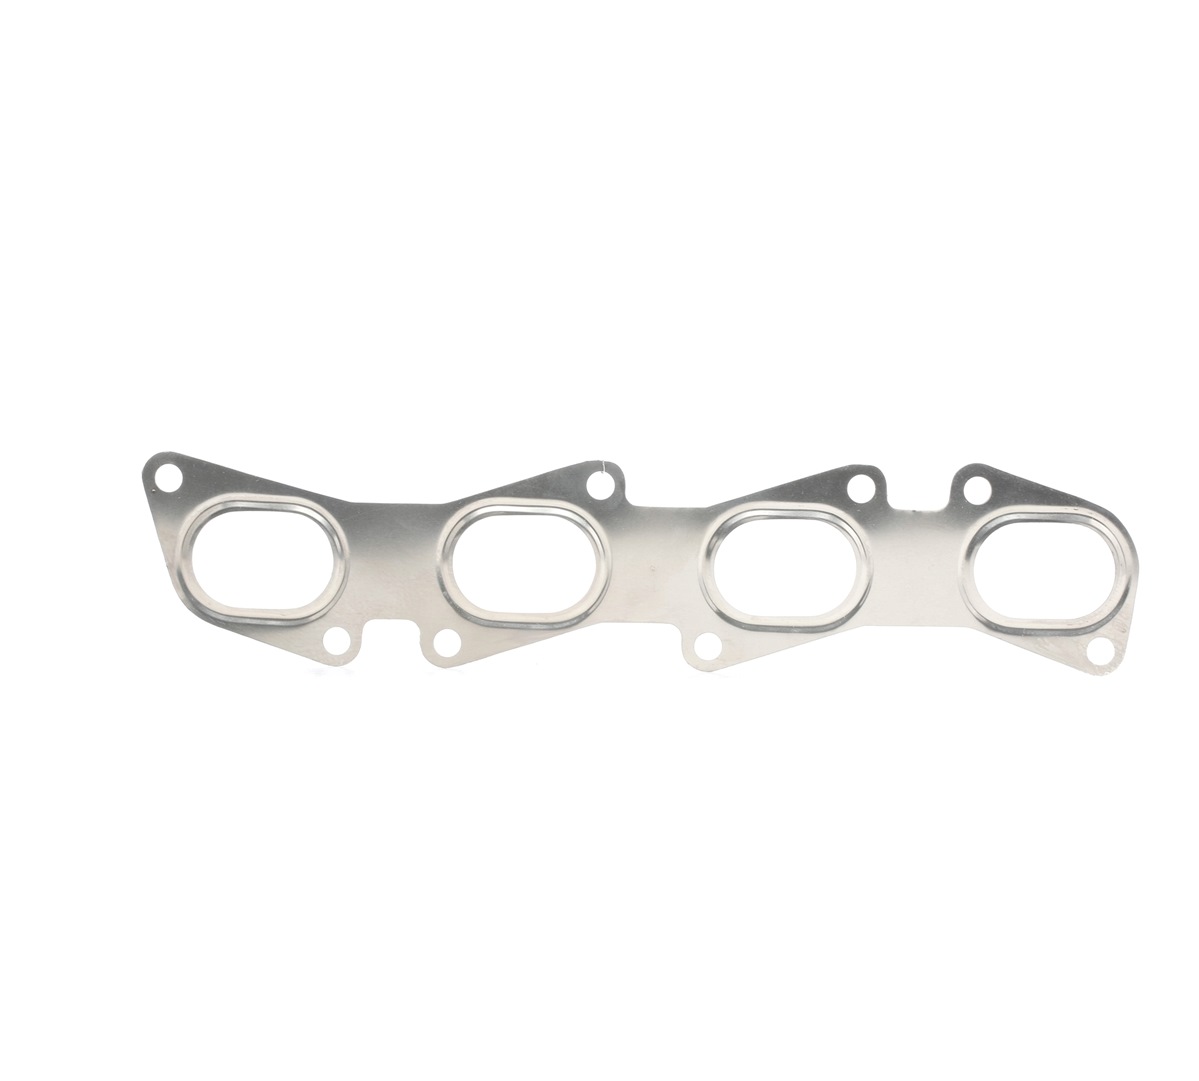 Buy Exhaust manifold gasket FA1 433-001 - Exhaust parts FIAT COUPE online